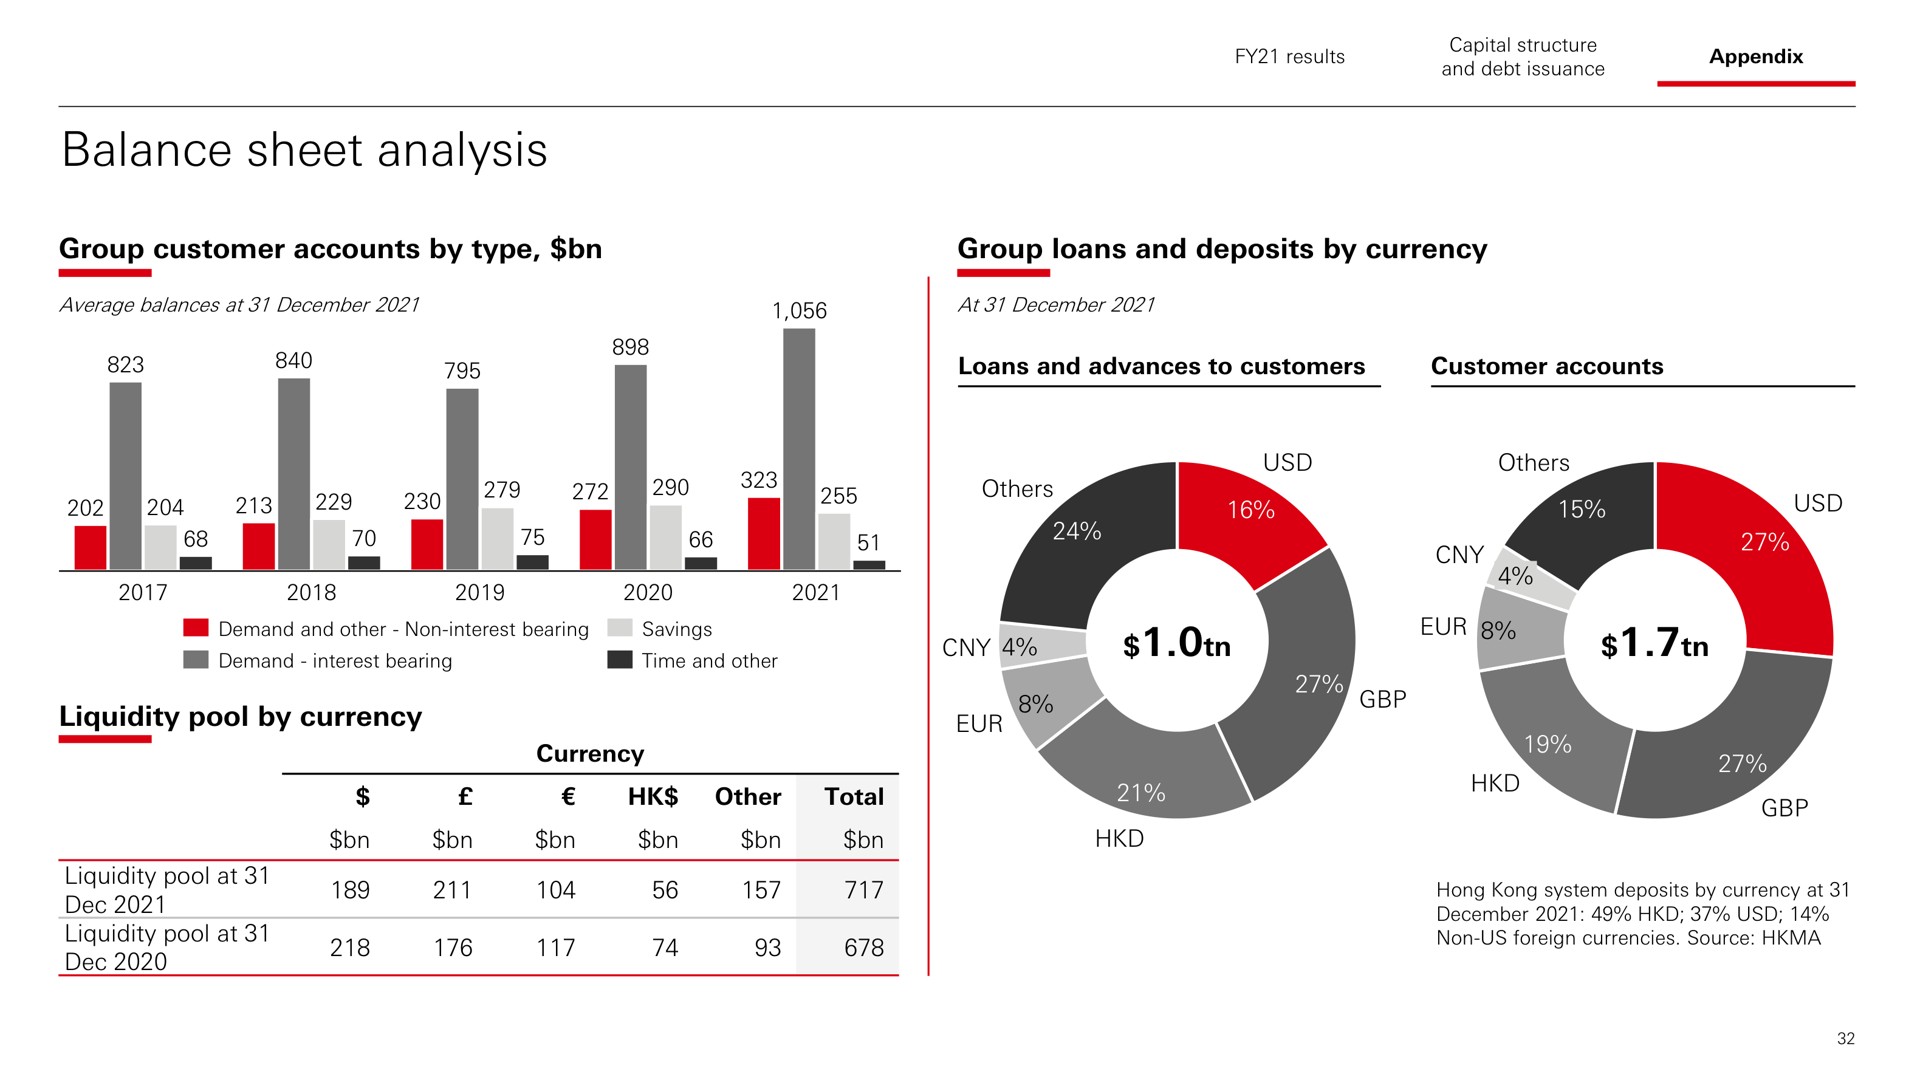 balance sheet analysis group customer accounts by type group loans and deposits by currency liquidity pool by currency other | HSBC